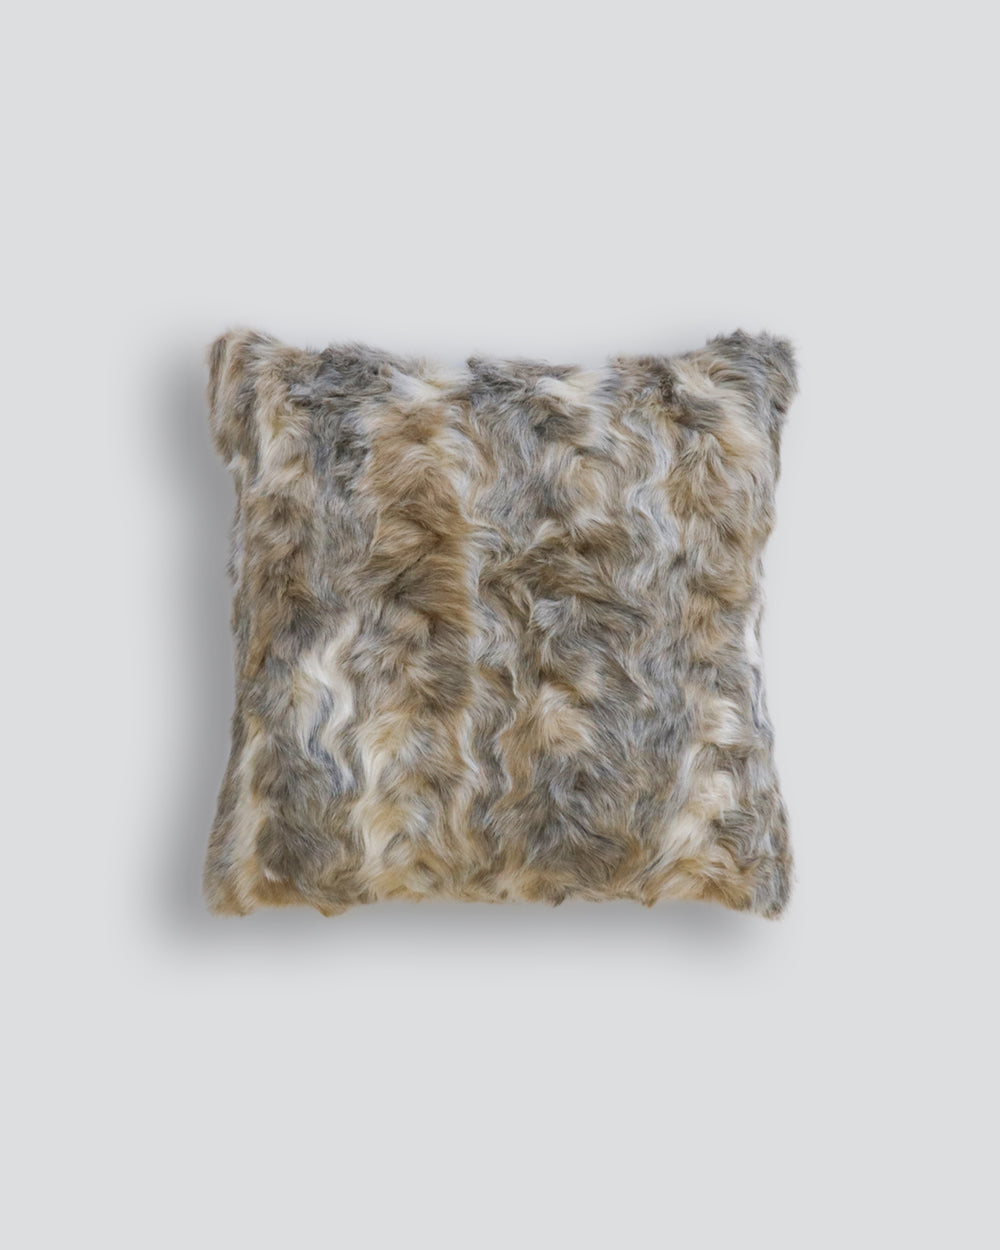 Heirloom Vintage Squirrel Grey Cushions in Faux Fur are available from Make Your House A Home Premium Stockist. Furniture Store Bendigo, Victoria. Australia Wide Delivery. Furtex Baya.